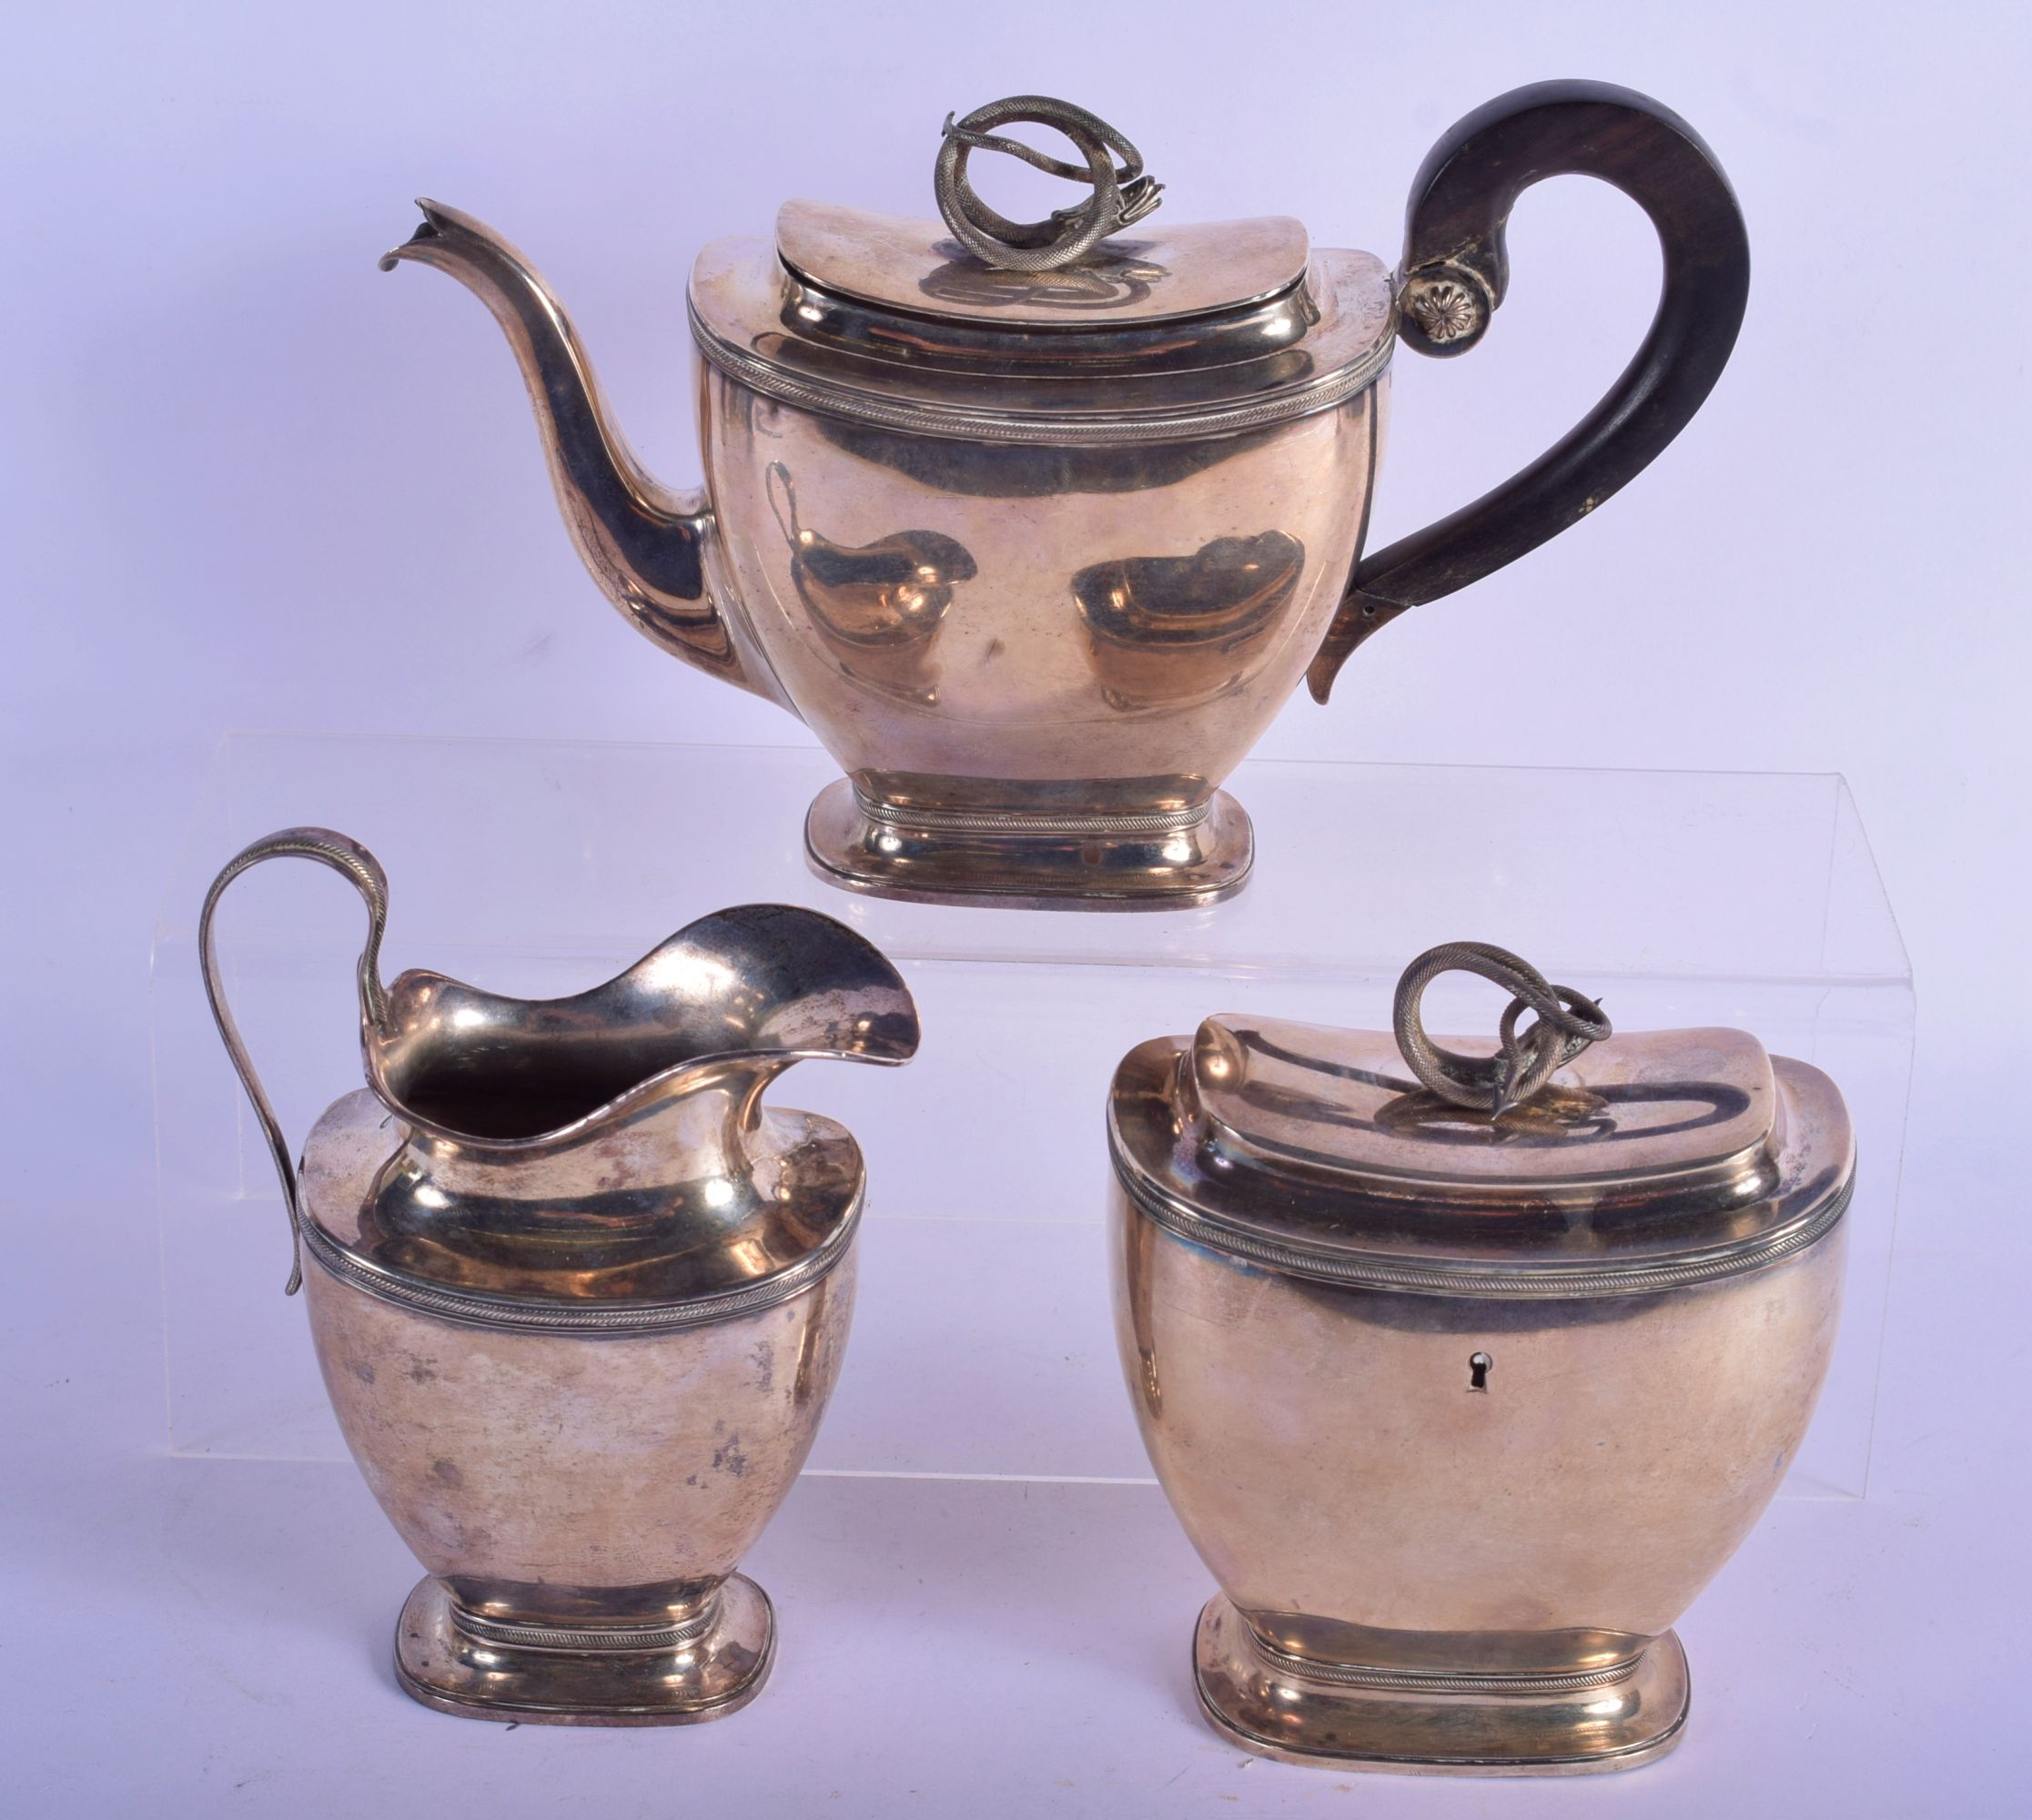 A 19TH CENTURY EUROPEAN SILVER SERPENT TEAPOT together with a similar tea caddy and cream jug. 1001